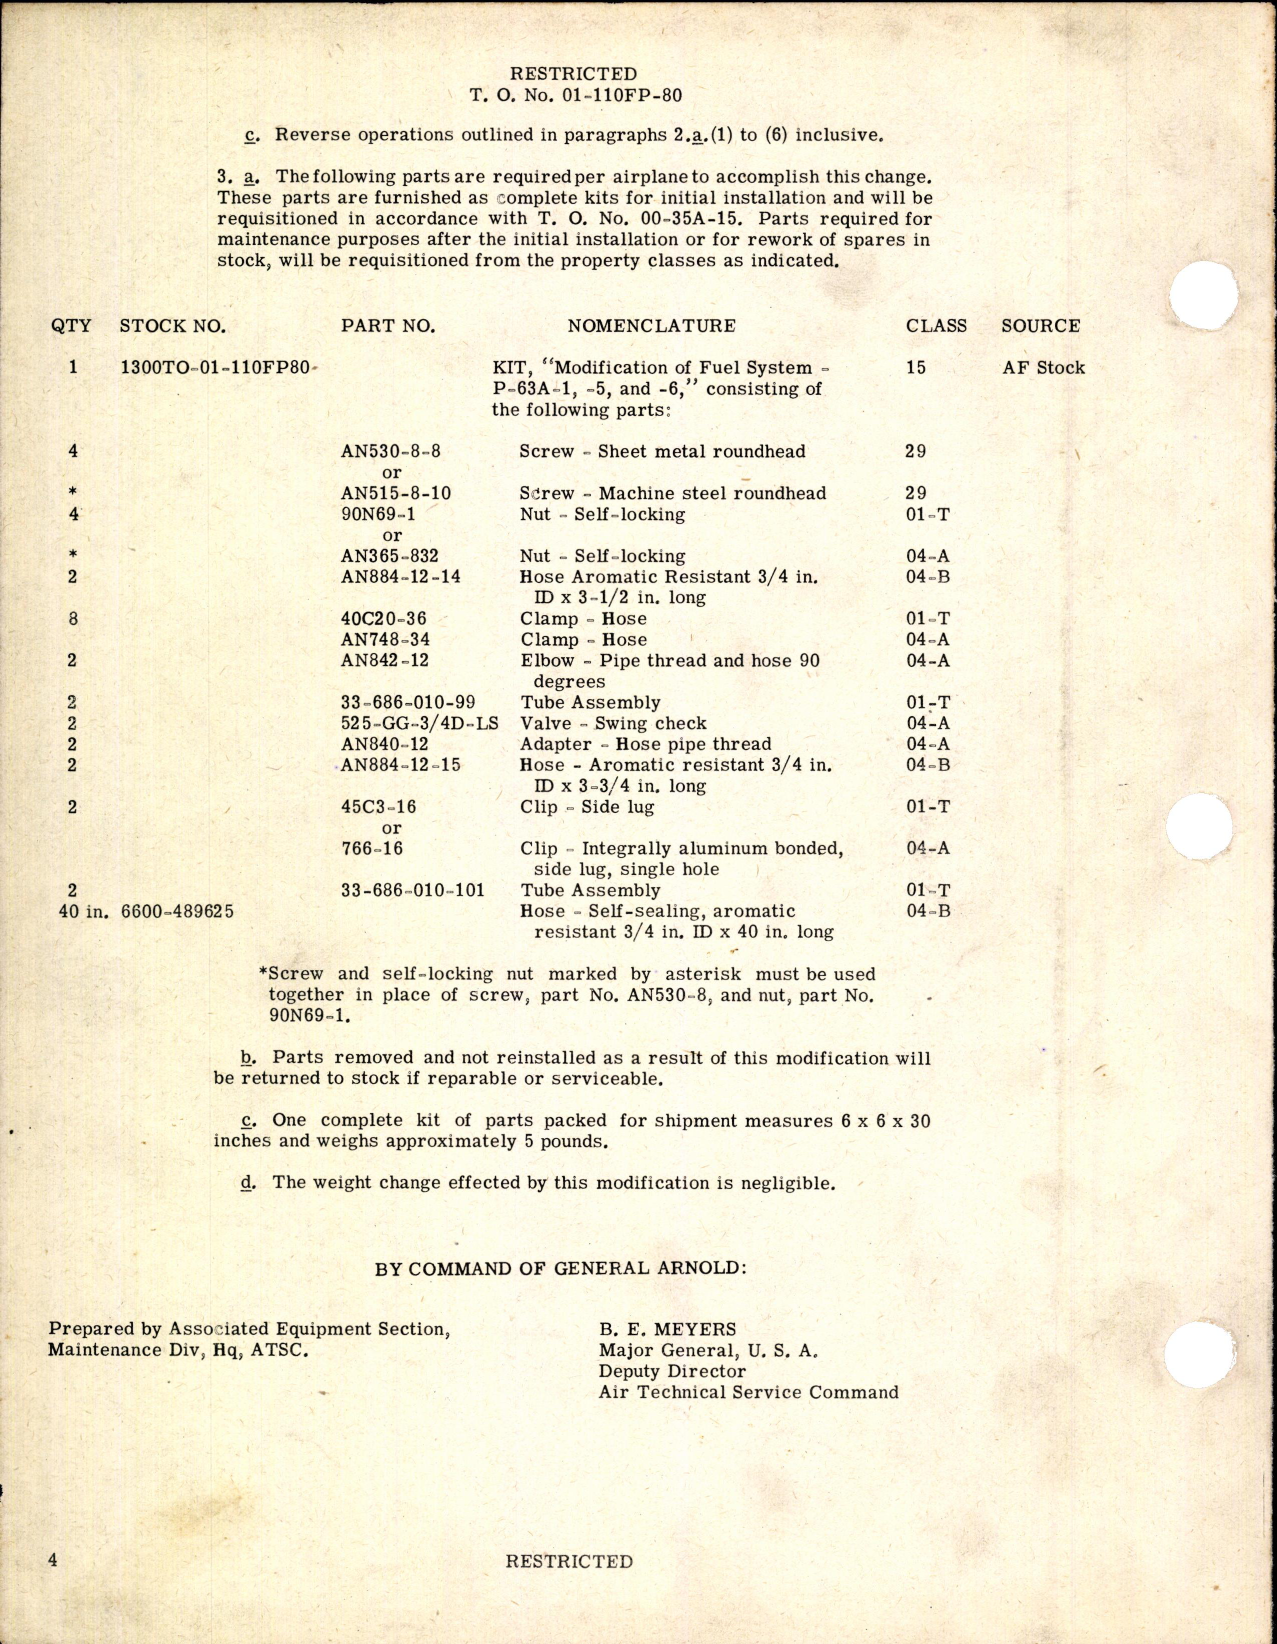 Sample page 4 from AirCorps Library document: Modification of Fuel System for P-63